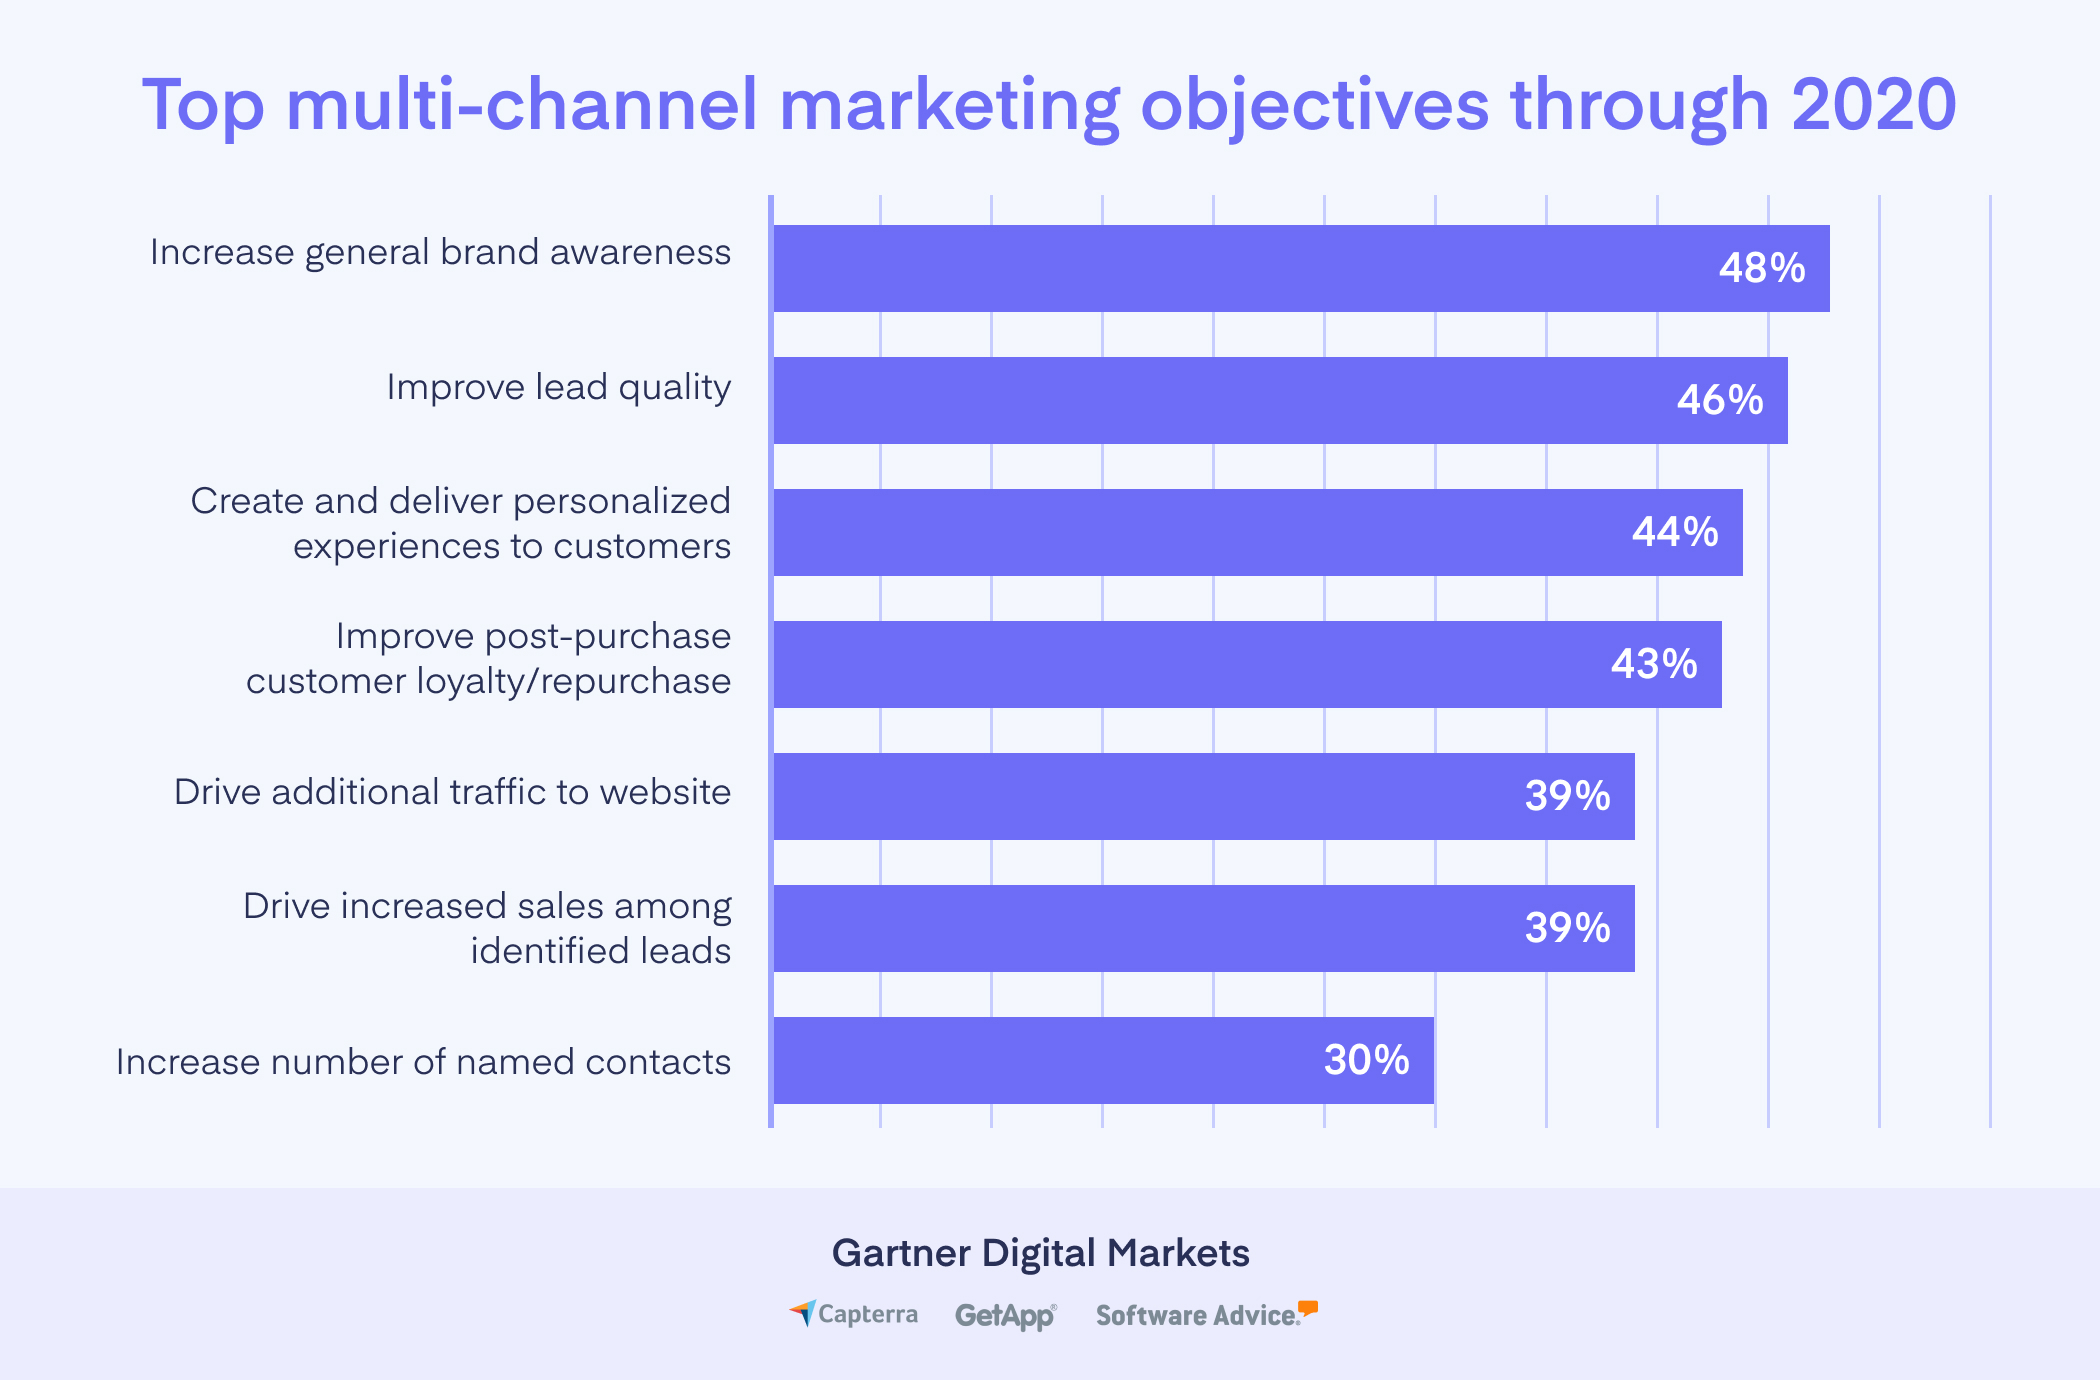 Top Multi-Channel Marketing Objectives Through 2020